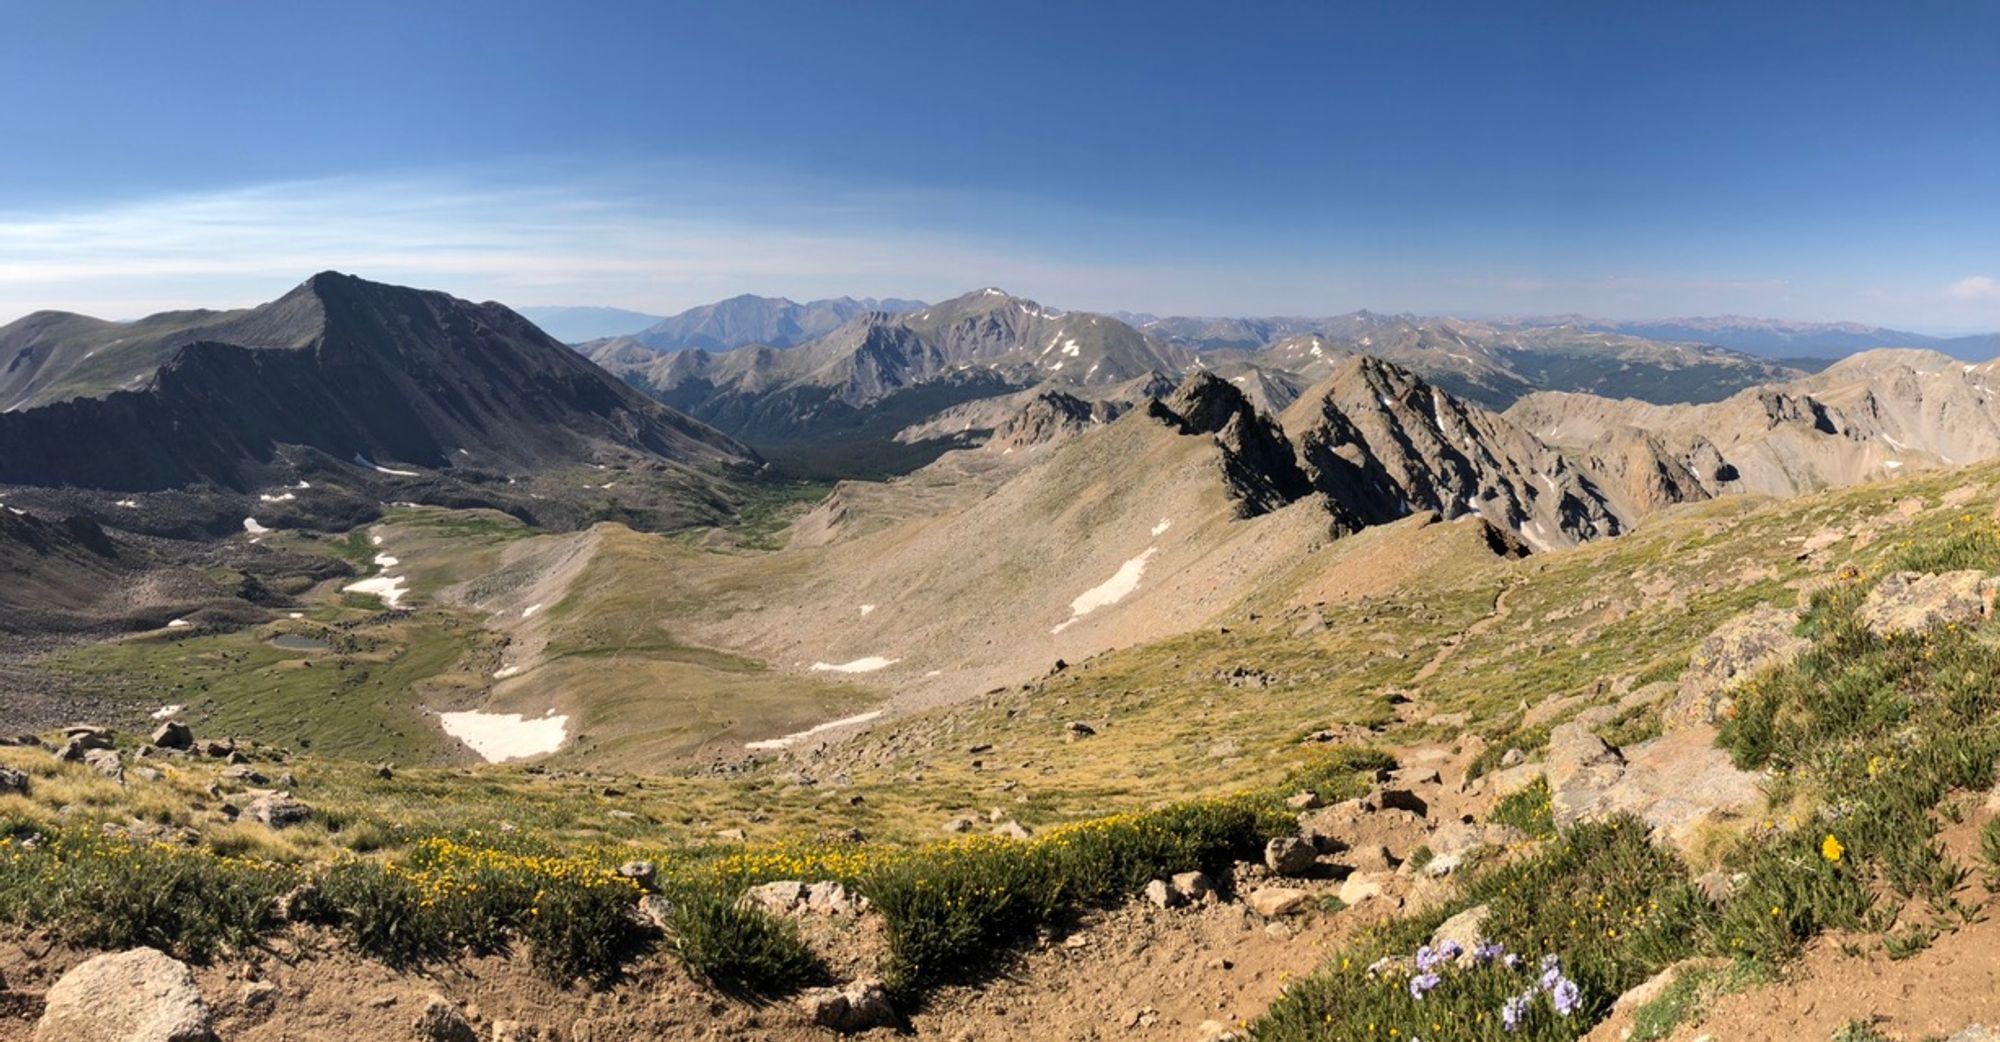 Panoramic view of the Rockies looking back down the trail we were hiking up to get to Mt. Harvard